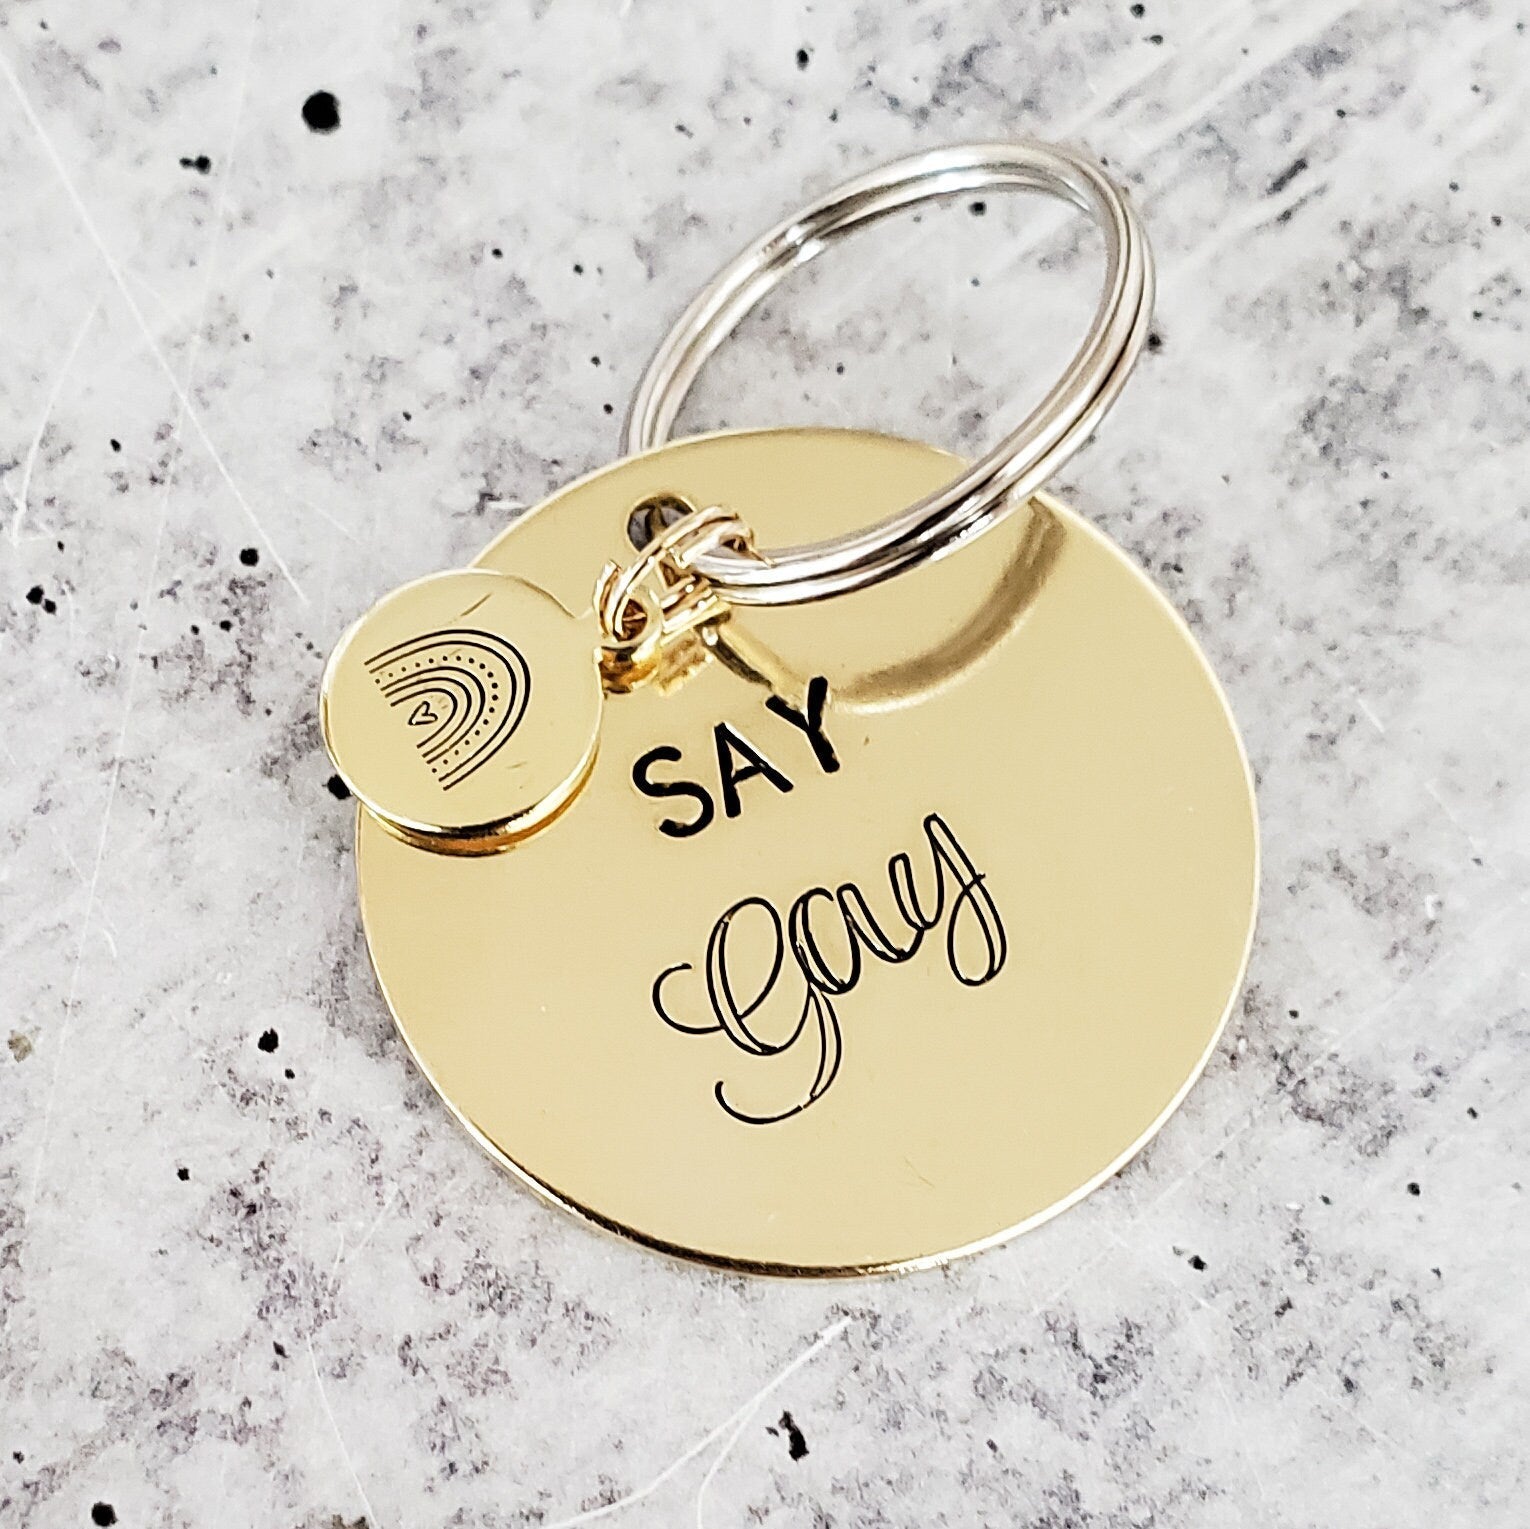 SAY GAY Political Keychain - Freedom of Speech Pride Gift for Gay Friend - Ally Keychain for LGBTQIA Rights - Queer Bag Accessory for Them